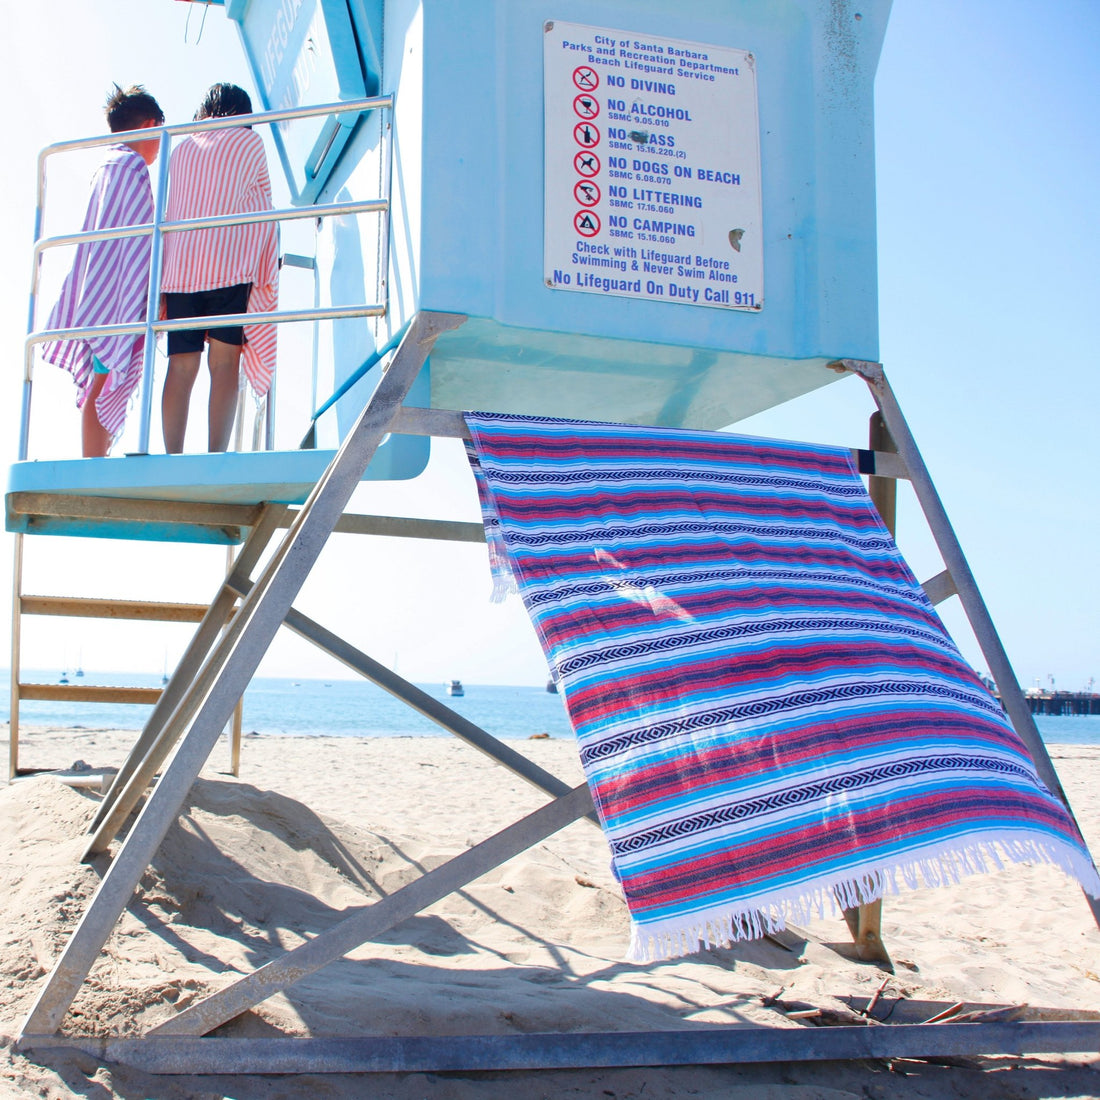 WHAT IS A FOUTA or PESHTAMAL TOWEL? - The Riviera Towel Company